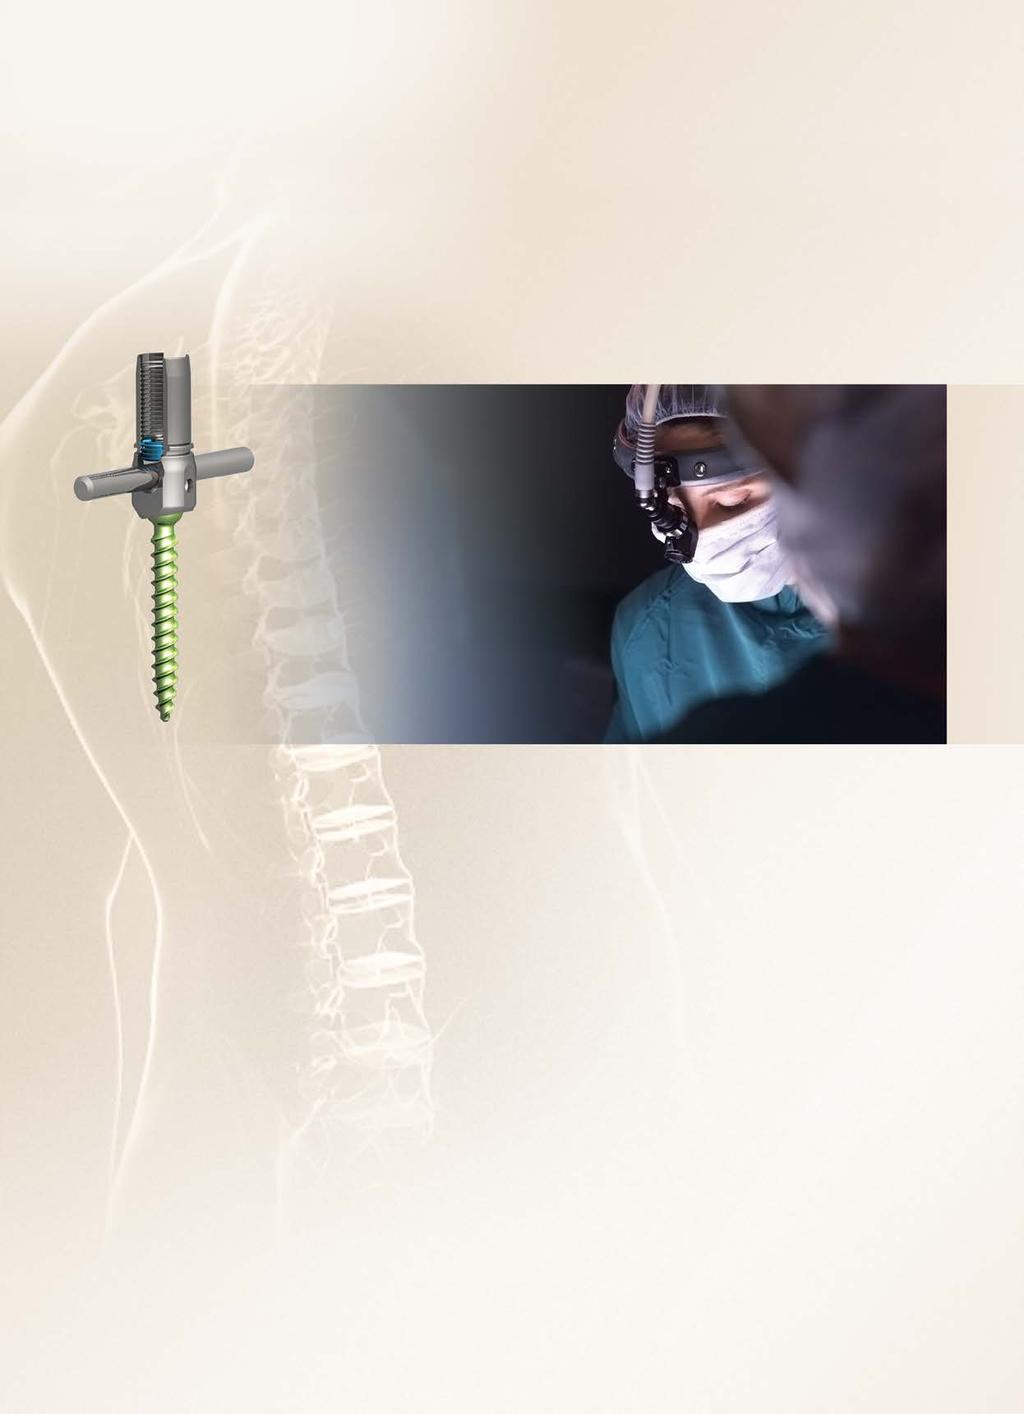 1. PRODUCT OVERVIEW The EXPEDIUM VERSE SPINAL SYSTEM has two configurations. The first configuration utilizes the classic solid shank, double lead threadform found on Expedium 5.